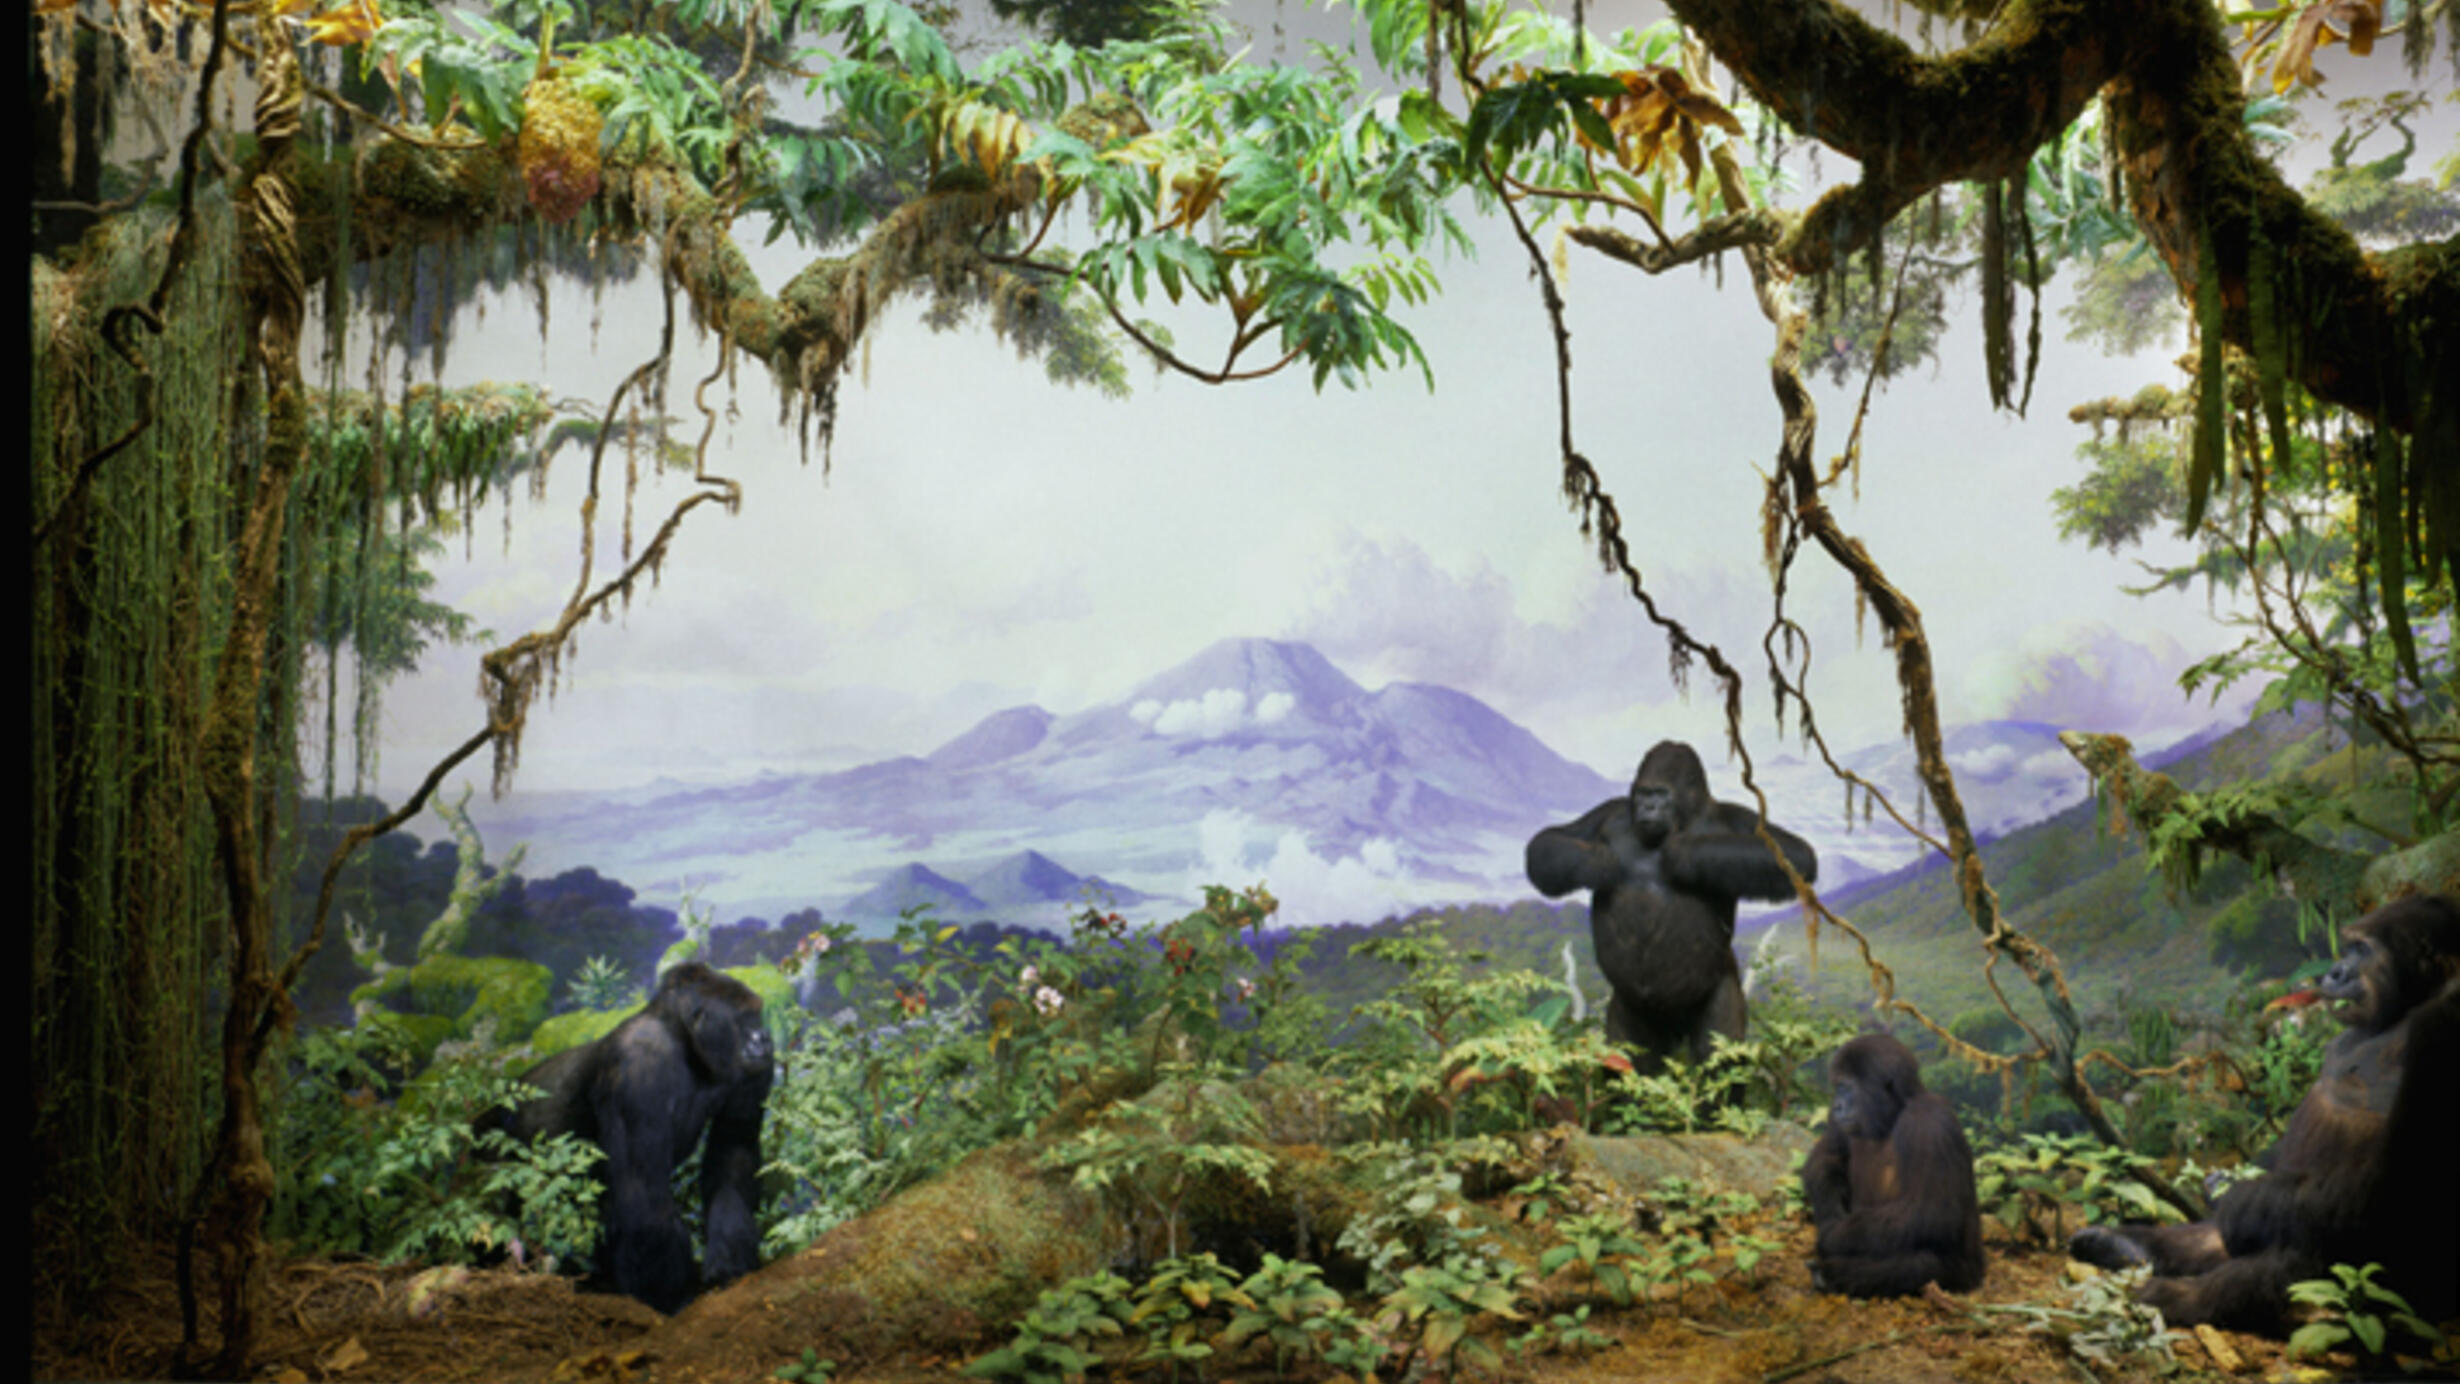 A diorama of African gorillas shows several adults and one juvenile in a jungle setting with a mountain in the background.